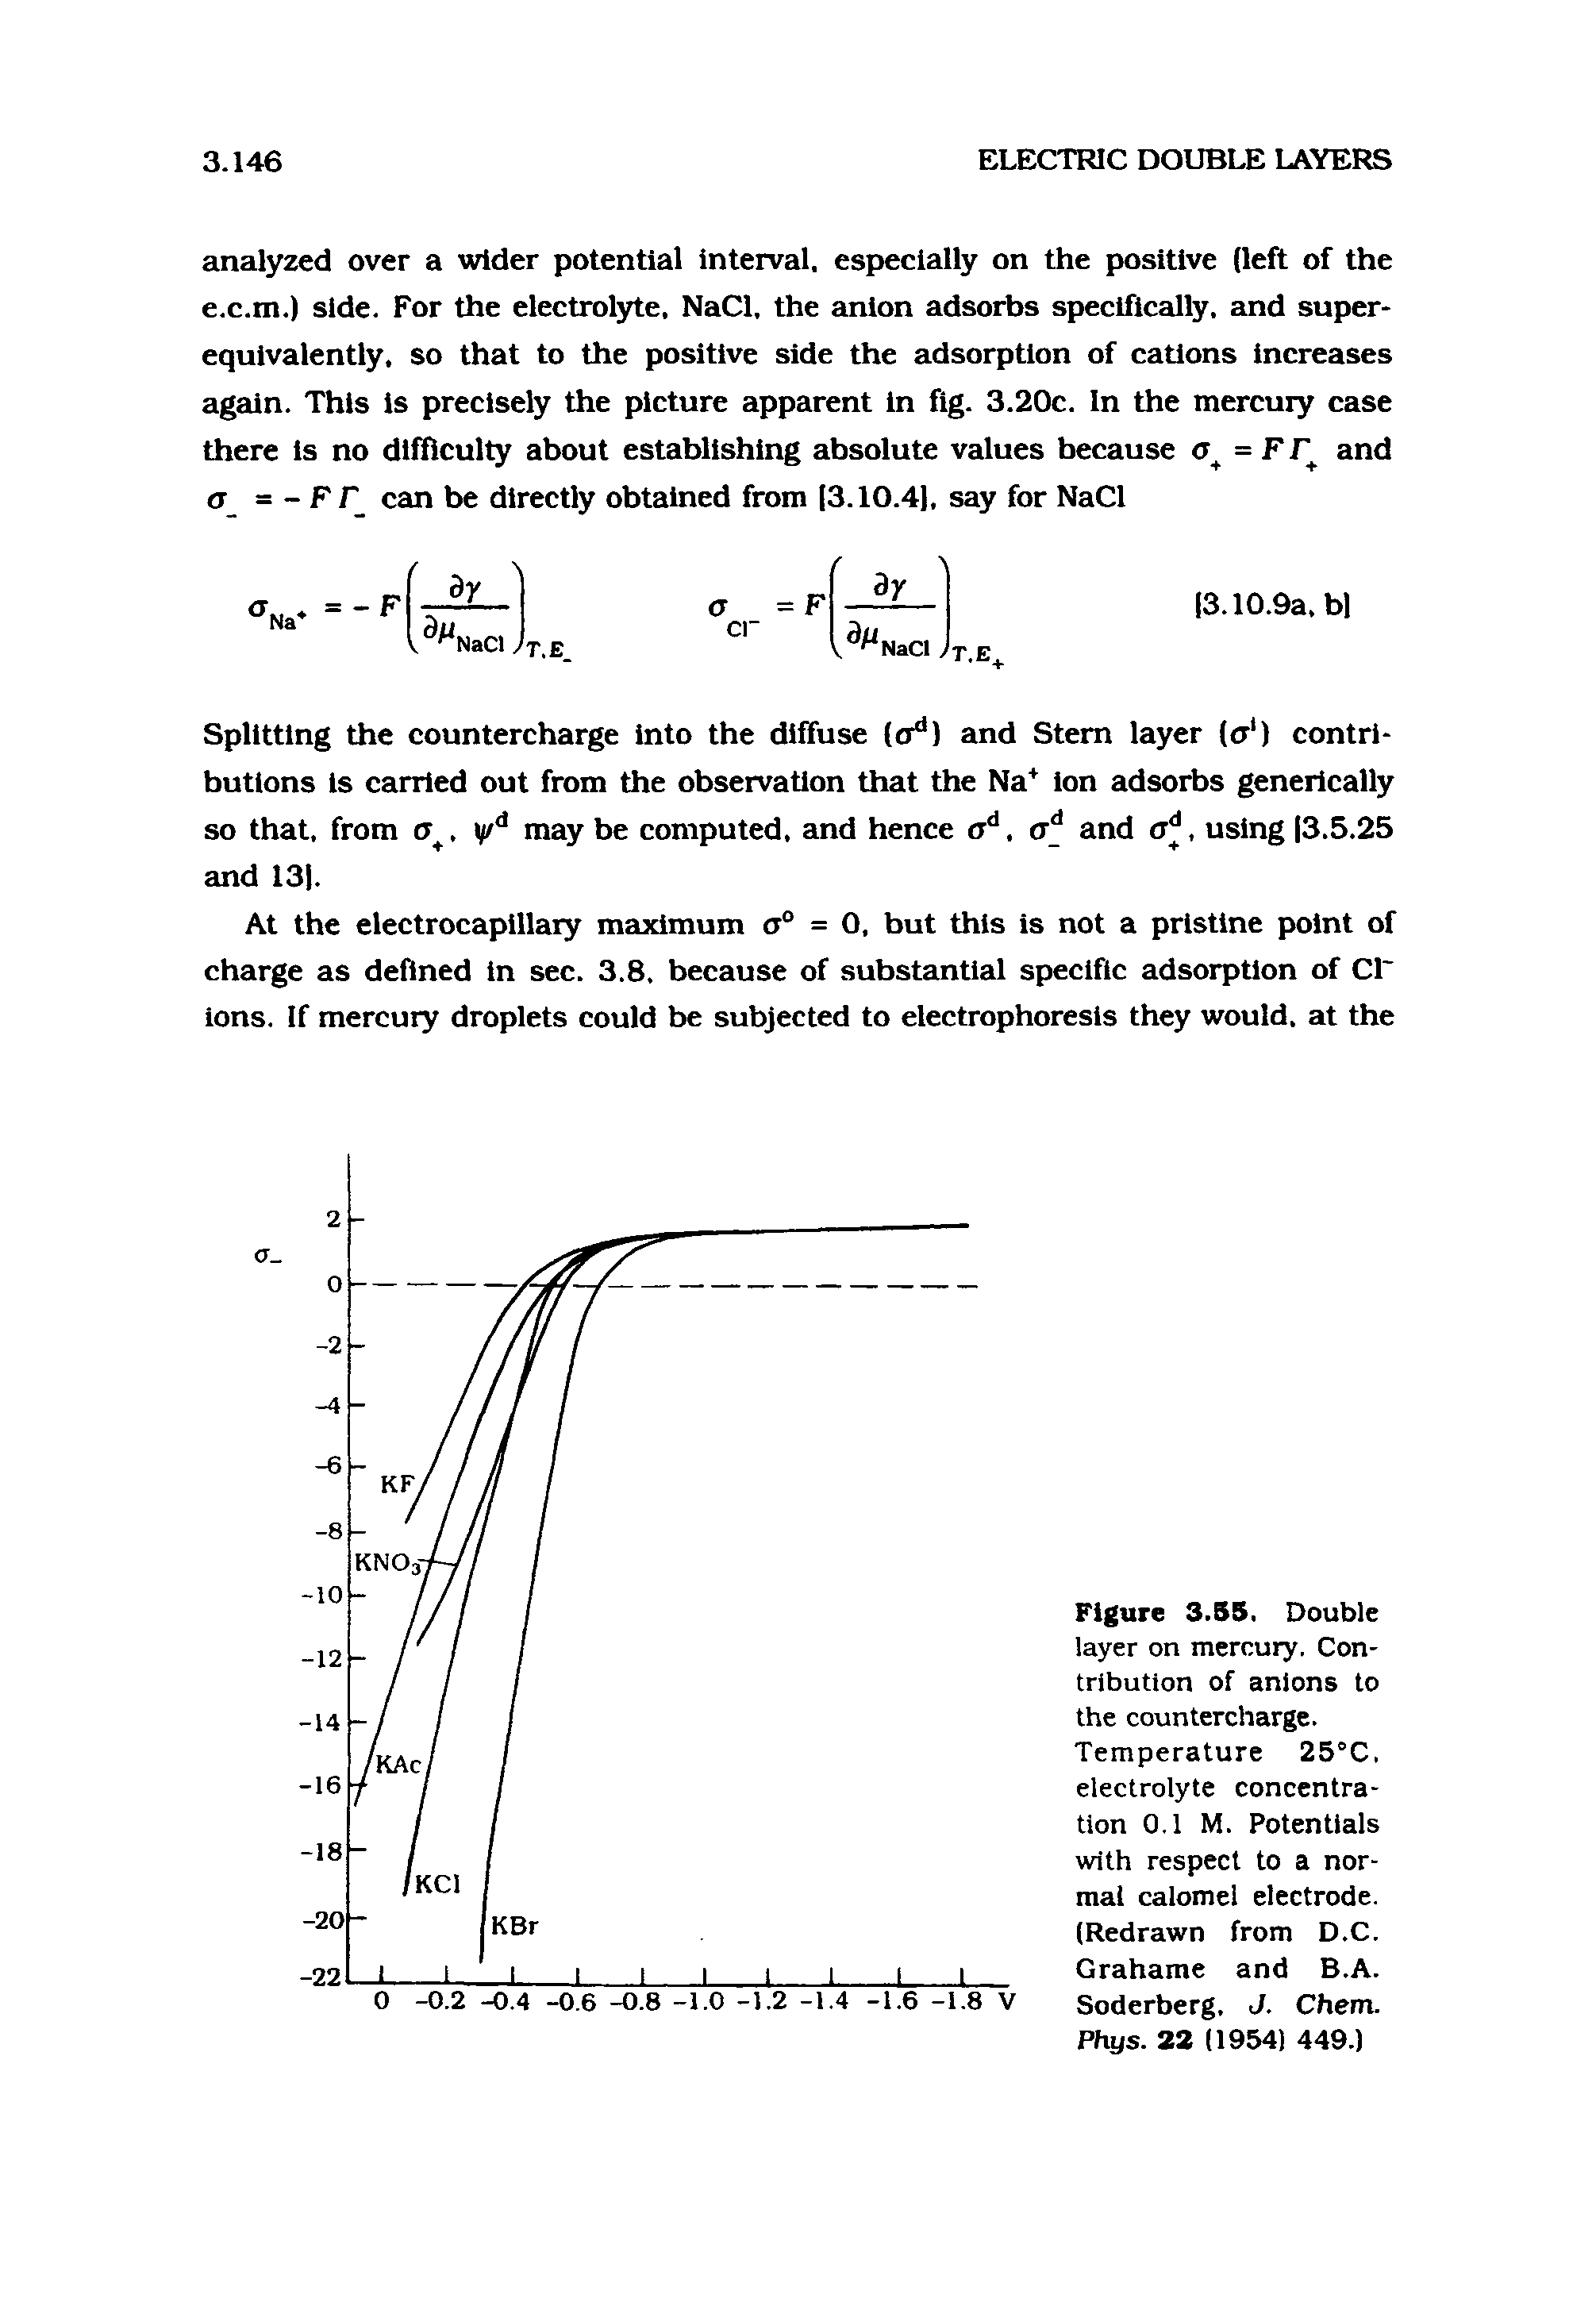 Figure 3.55, Double layer on mercury. Contribution of anions to the countercharge. Temperature 25°C. electrolyte concentration 0.1 M. Potentials with respect to a normal calomel electrode. (Redrawn from D.C. Grahame and B.A. Soderberg, J. Chem. Phys. 22 (19541 449.)...